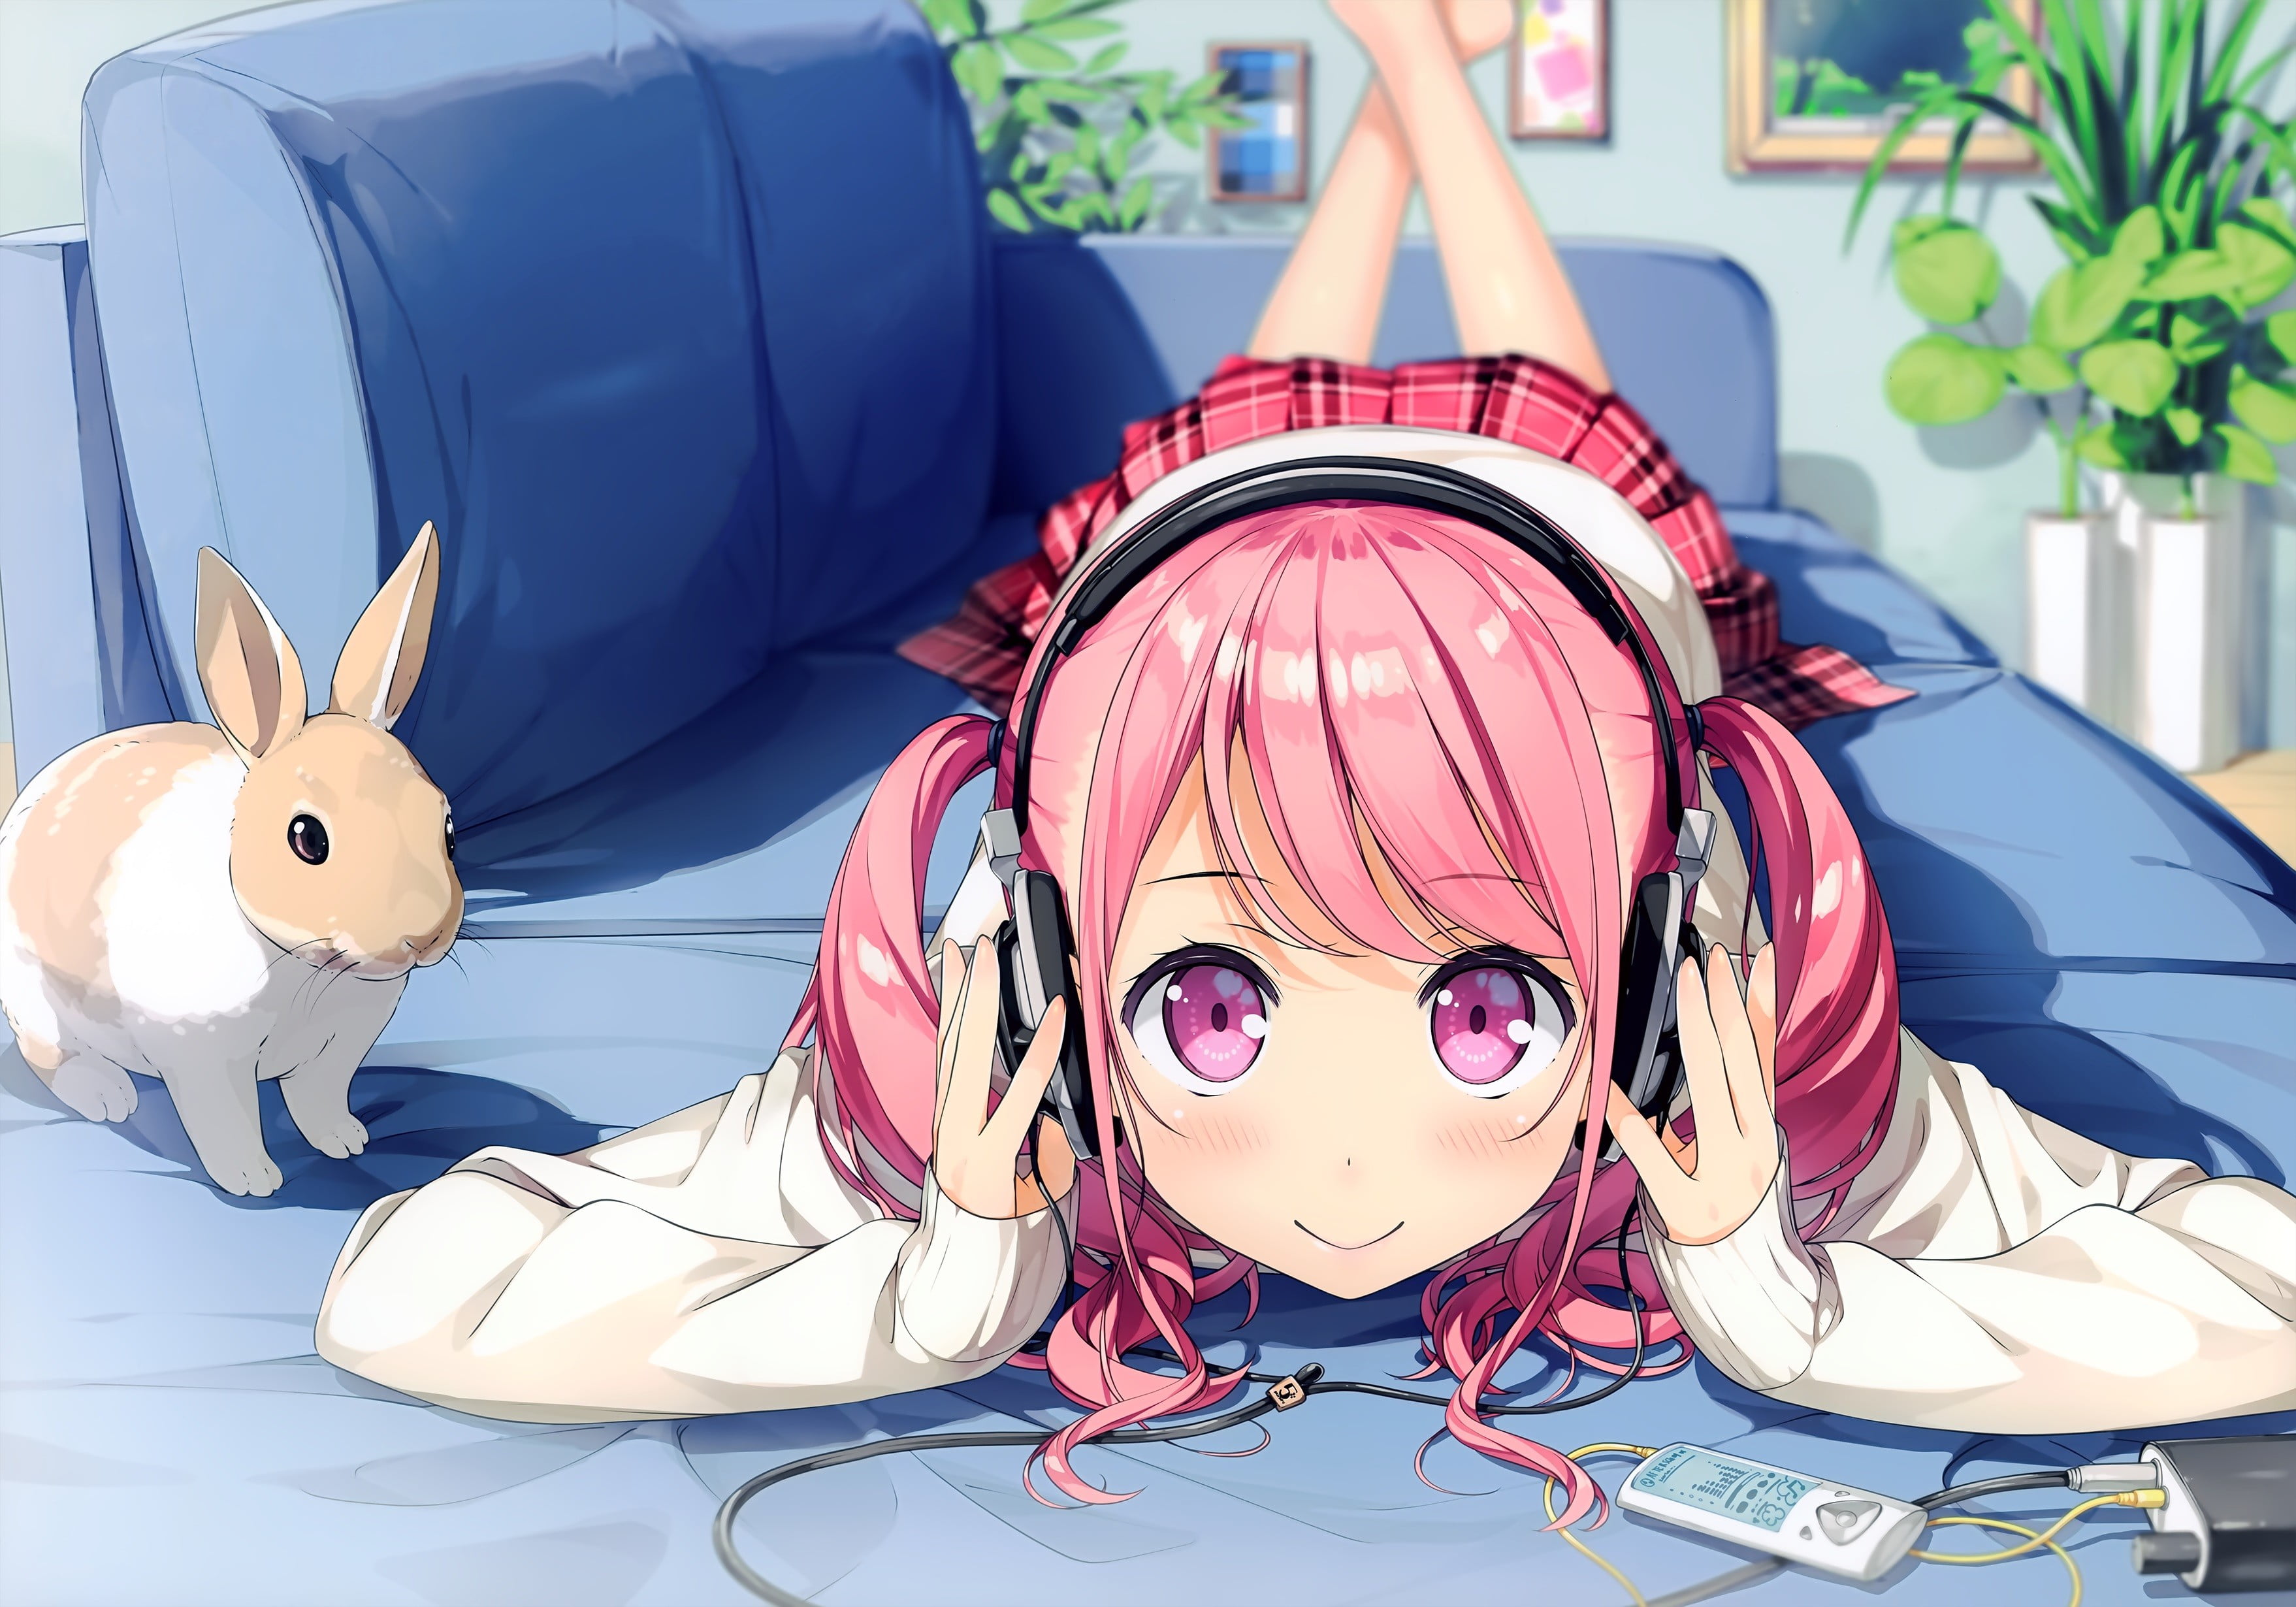 4. Anime girl with curly blue hair and headphones - wide 5